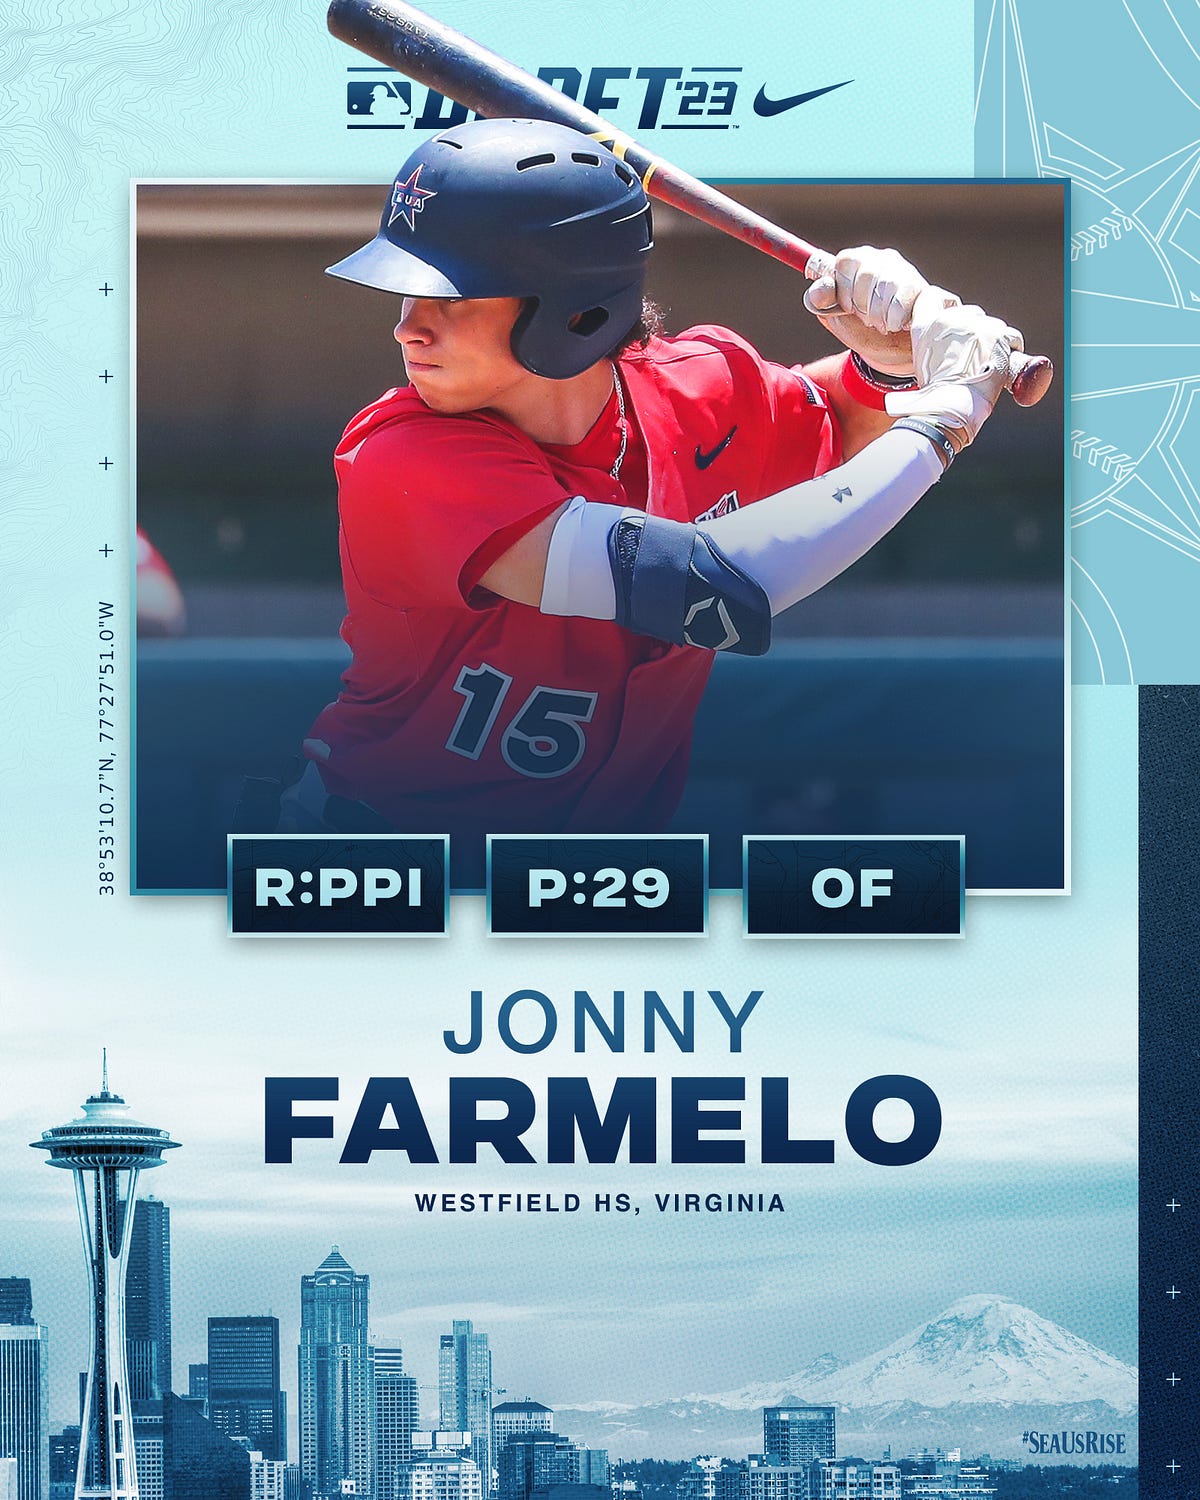 Mariners Select OF Jonny Farmelo 29th Overall in the 2023 MLB Draft by Mariners PR From the Corner of Edgar and Dave image